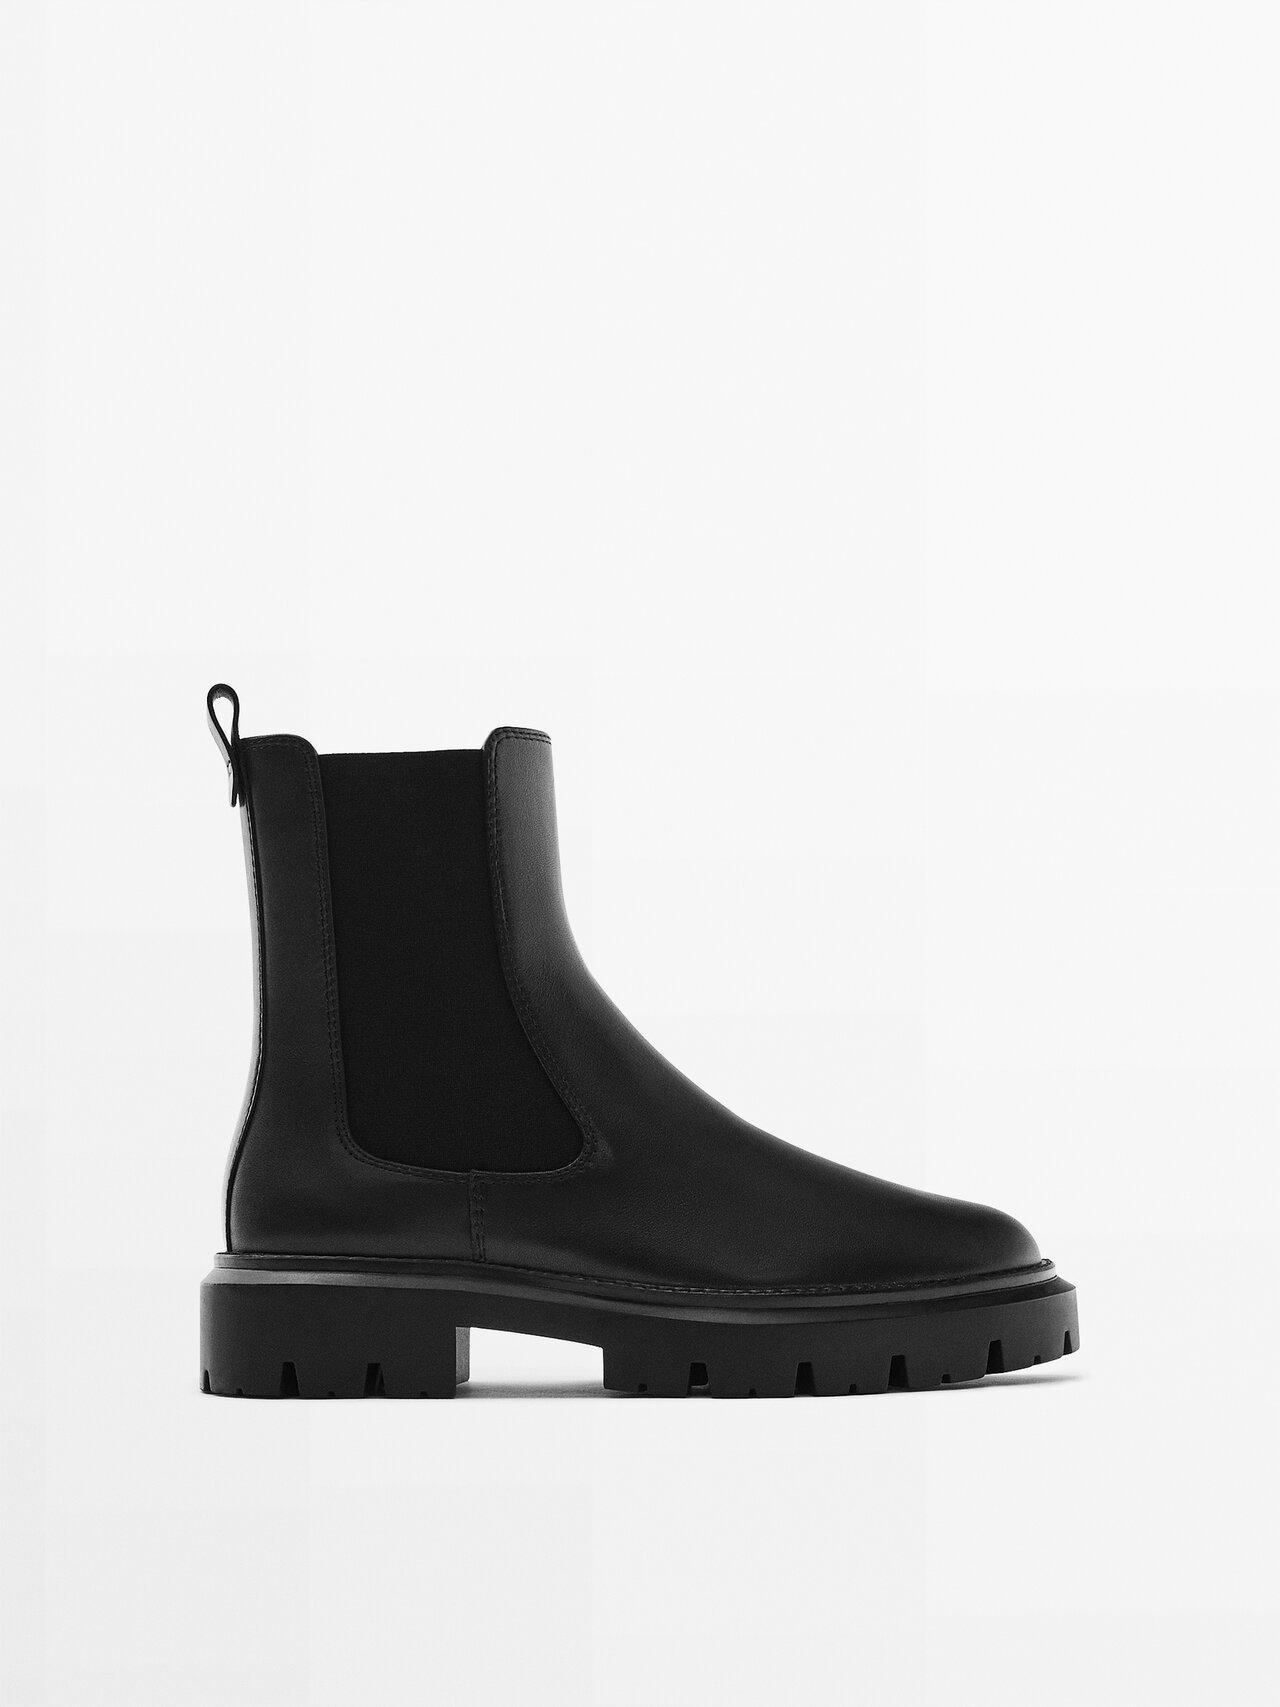 MASSIMO DUTTI Chelsea Boots With Lambskin Insole in Black | Lyst